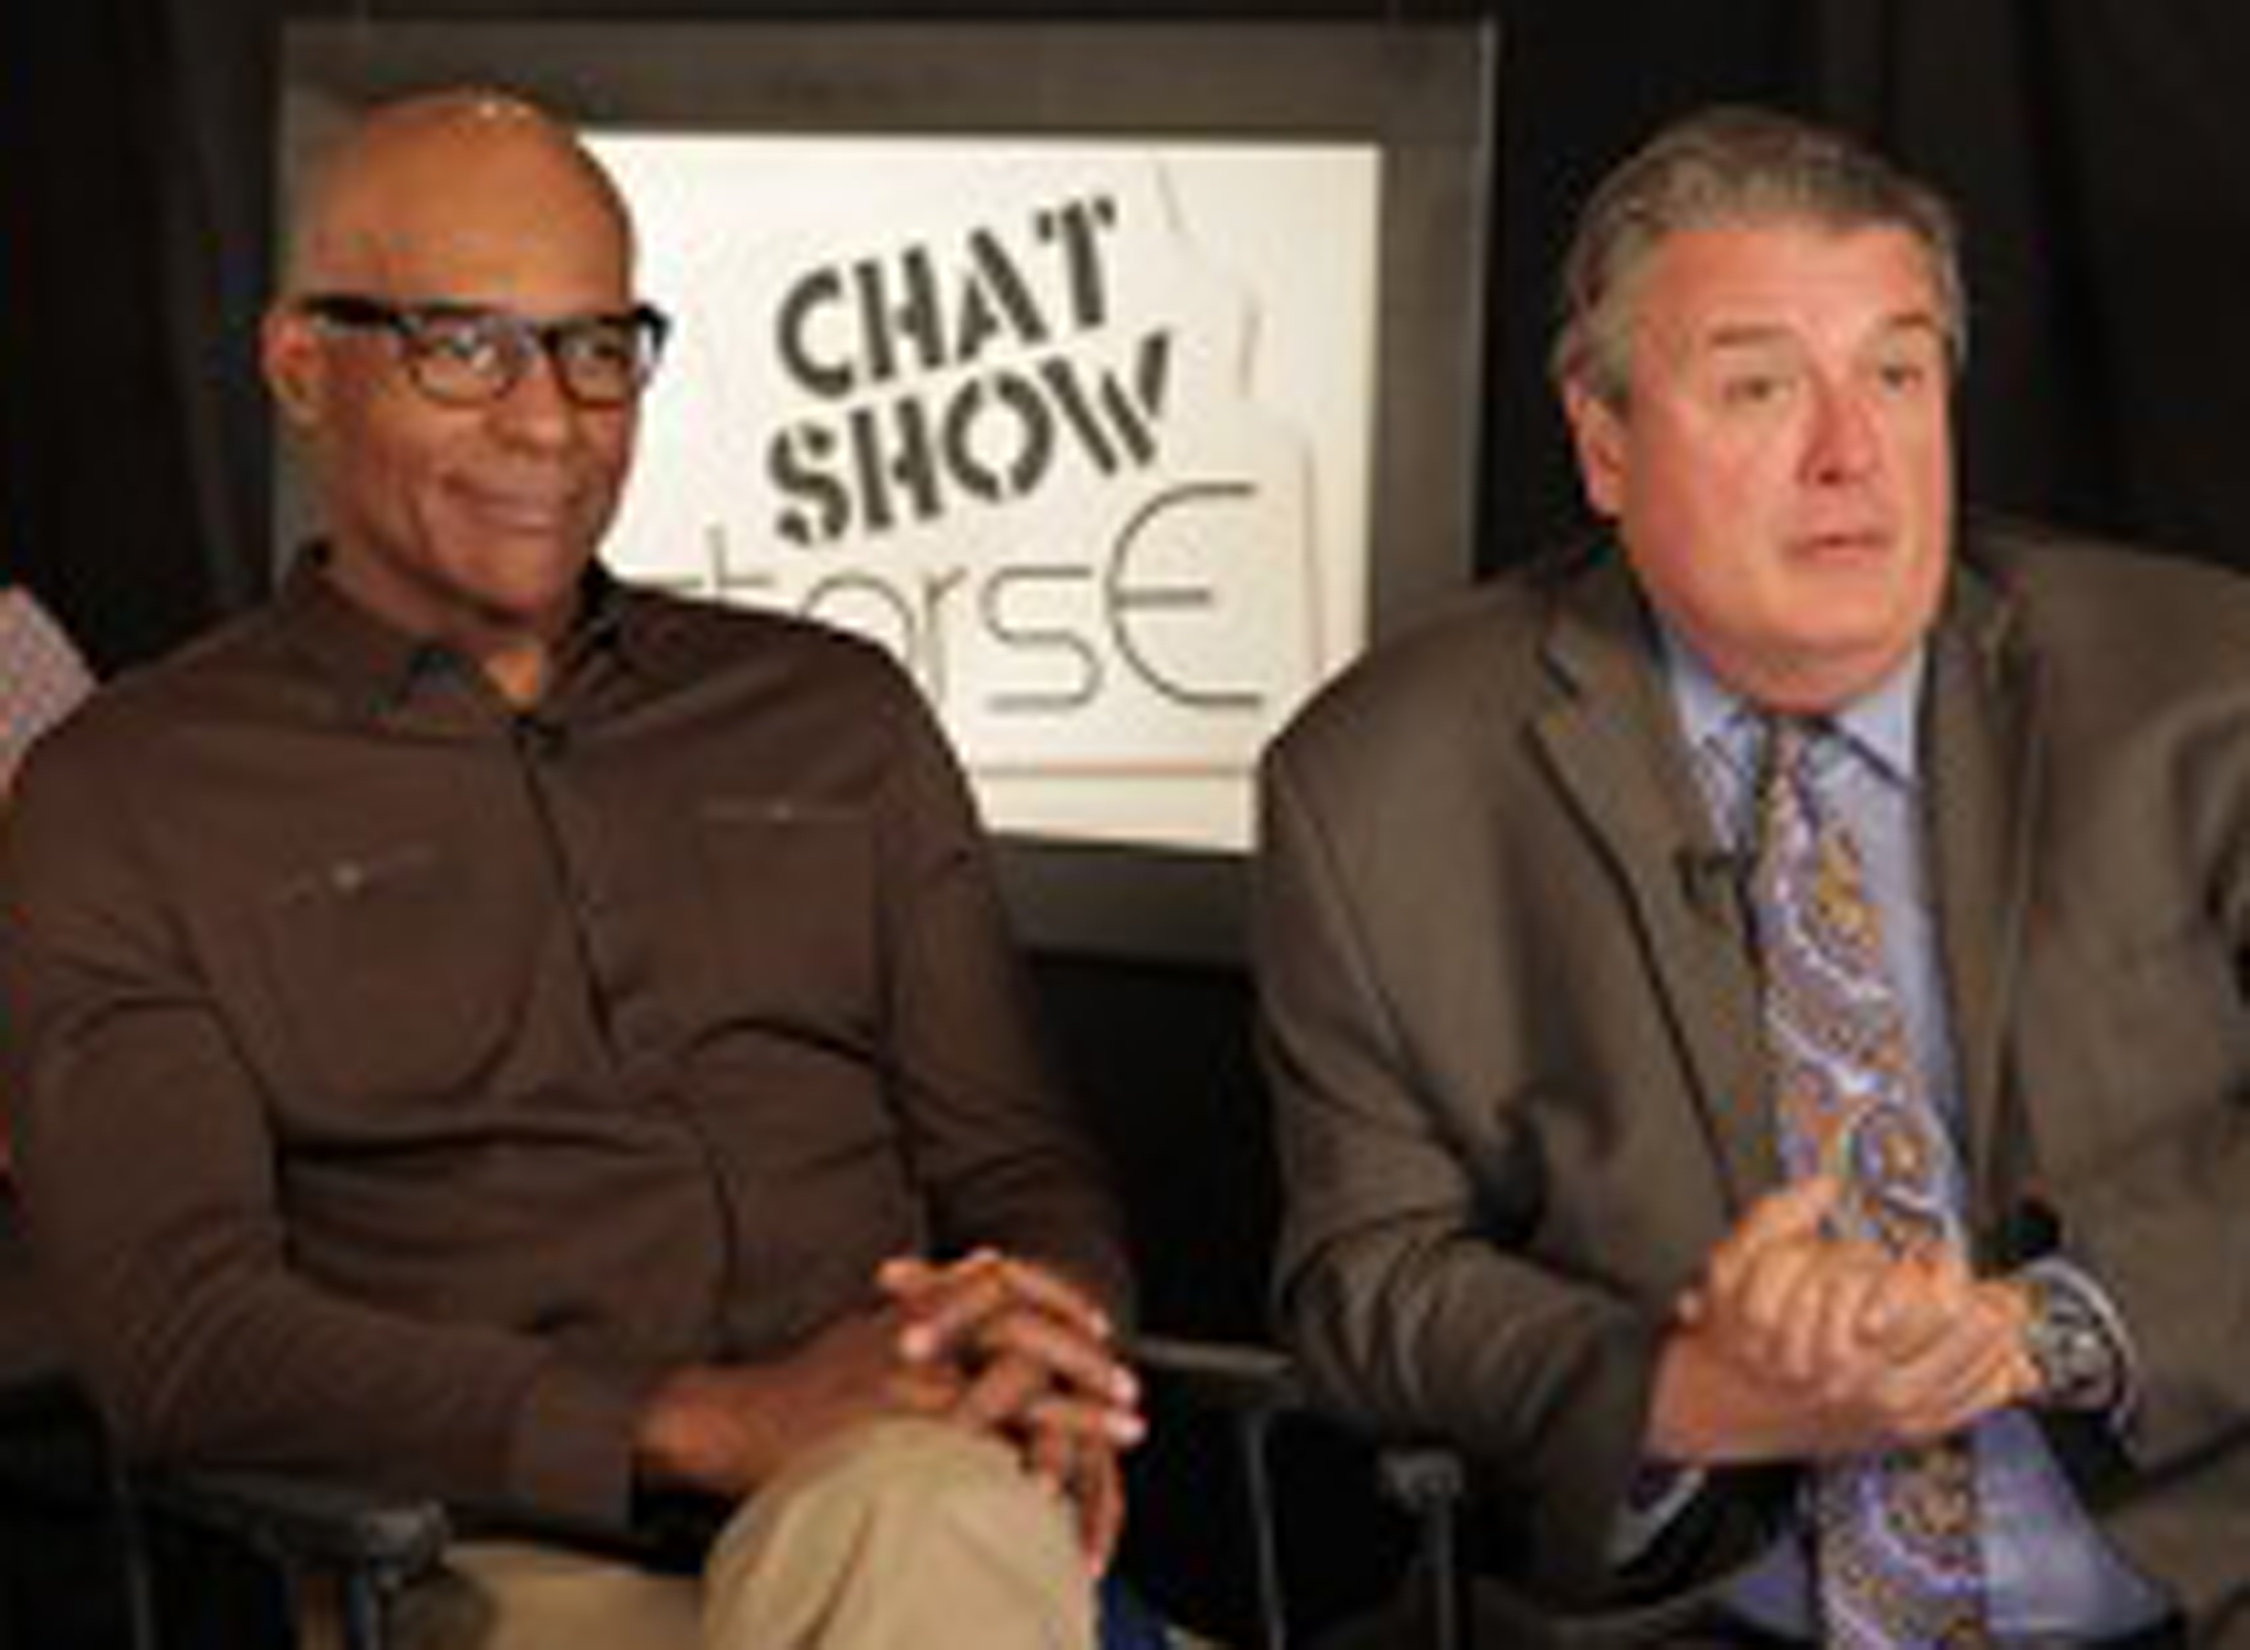 Michael Dorn guests on ActorsE Chat with host Kurt Kelly